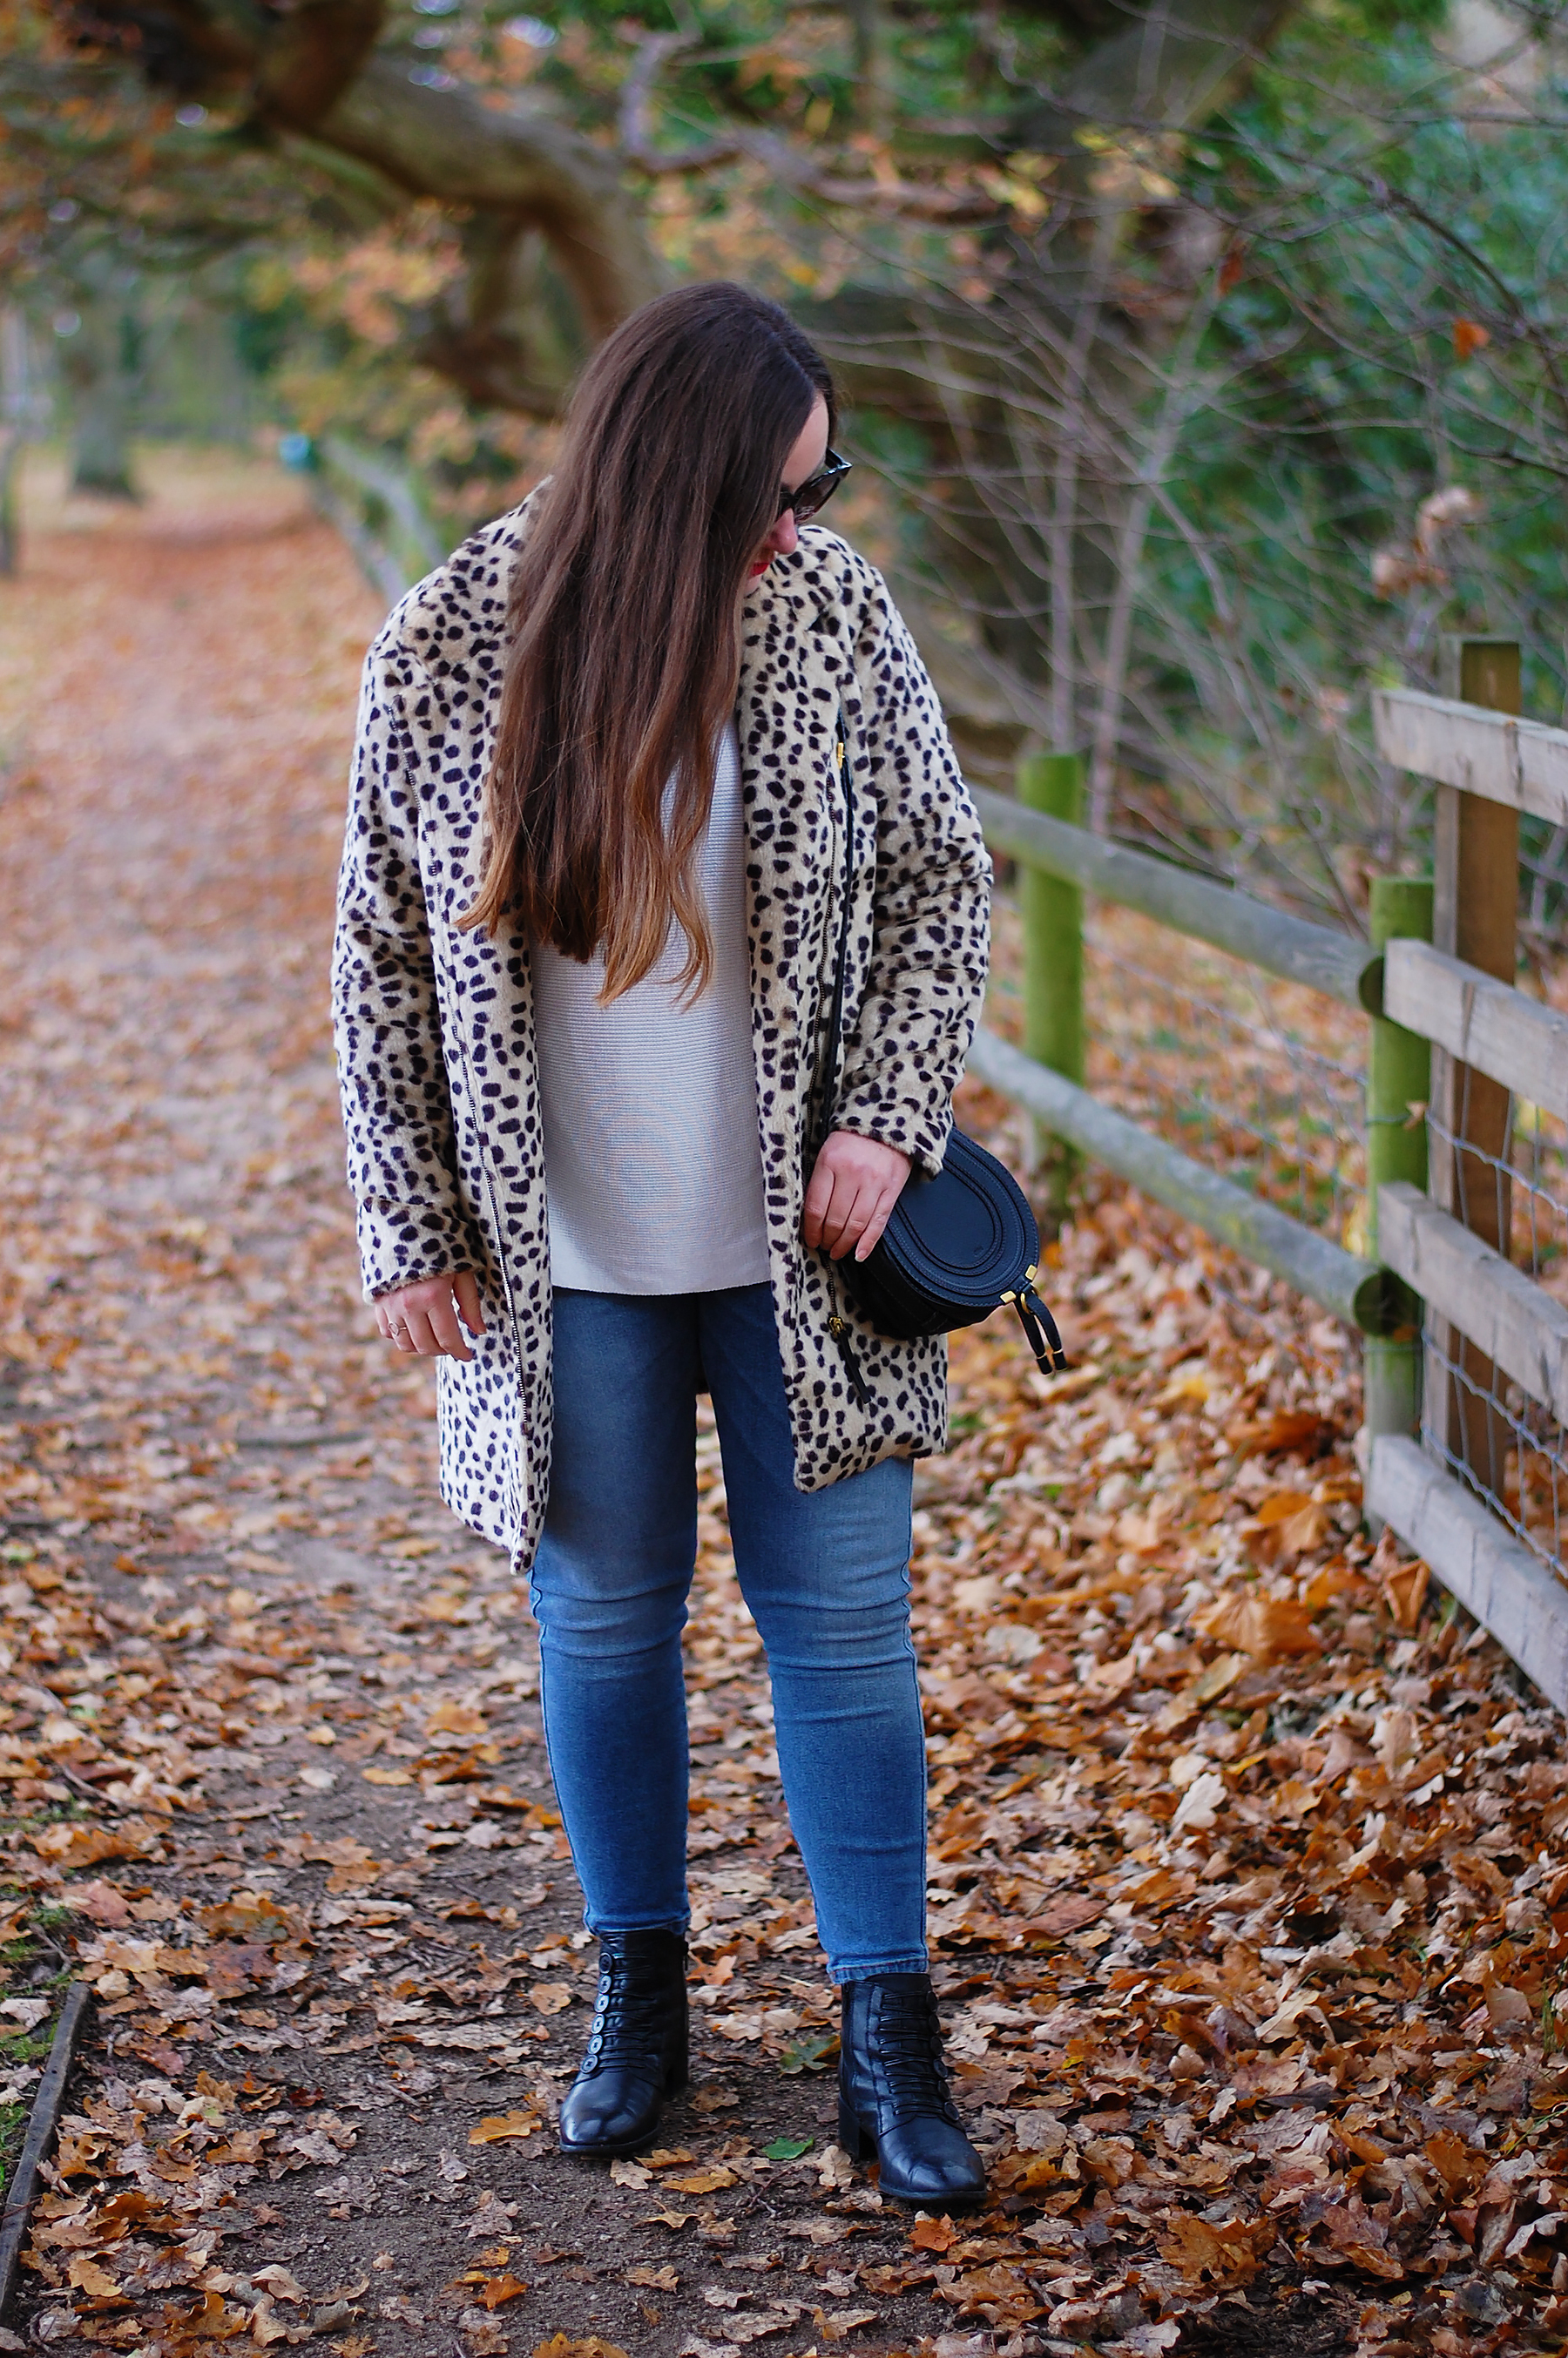 Animal Print Jacket and blue jeans outfit